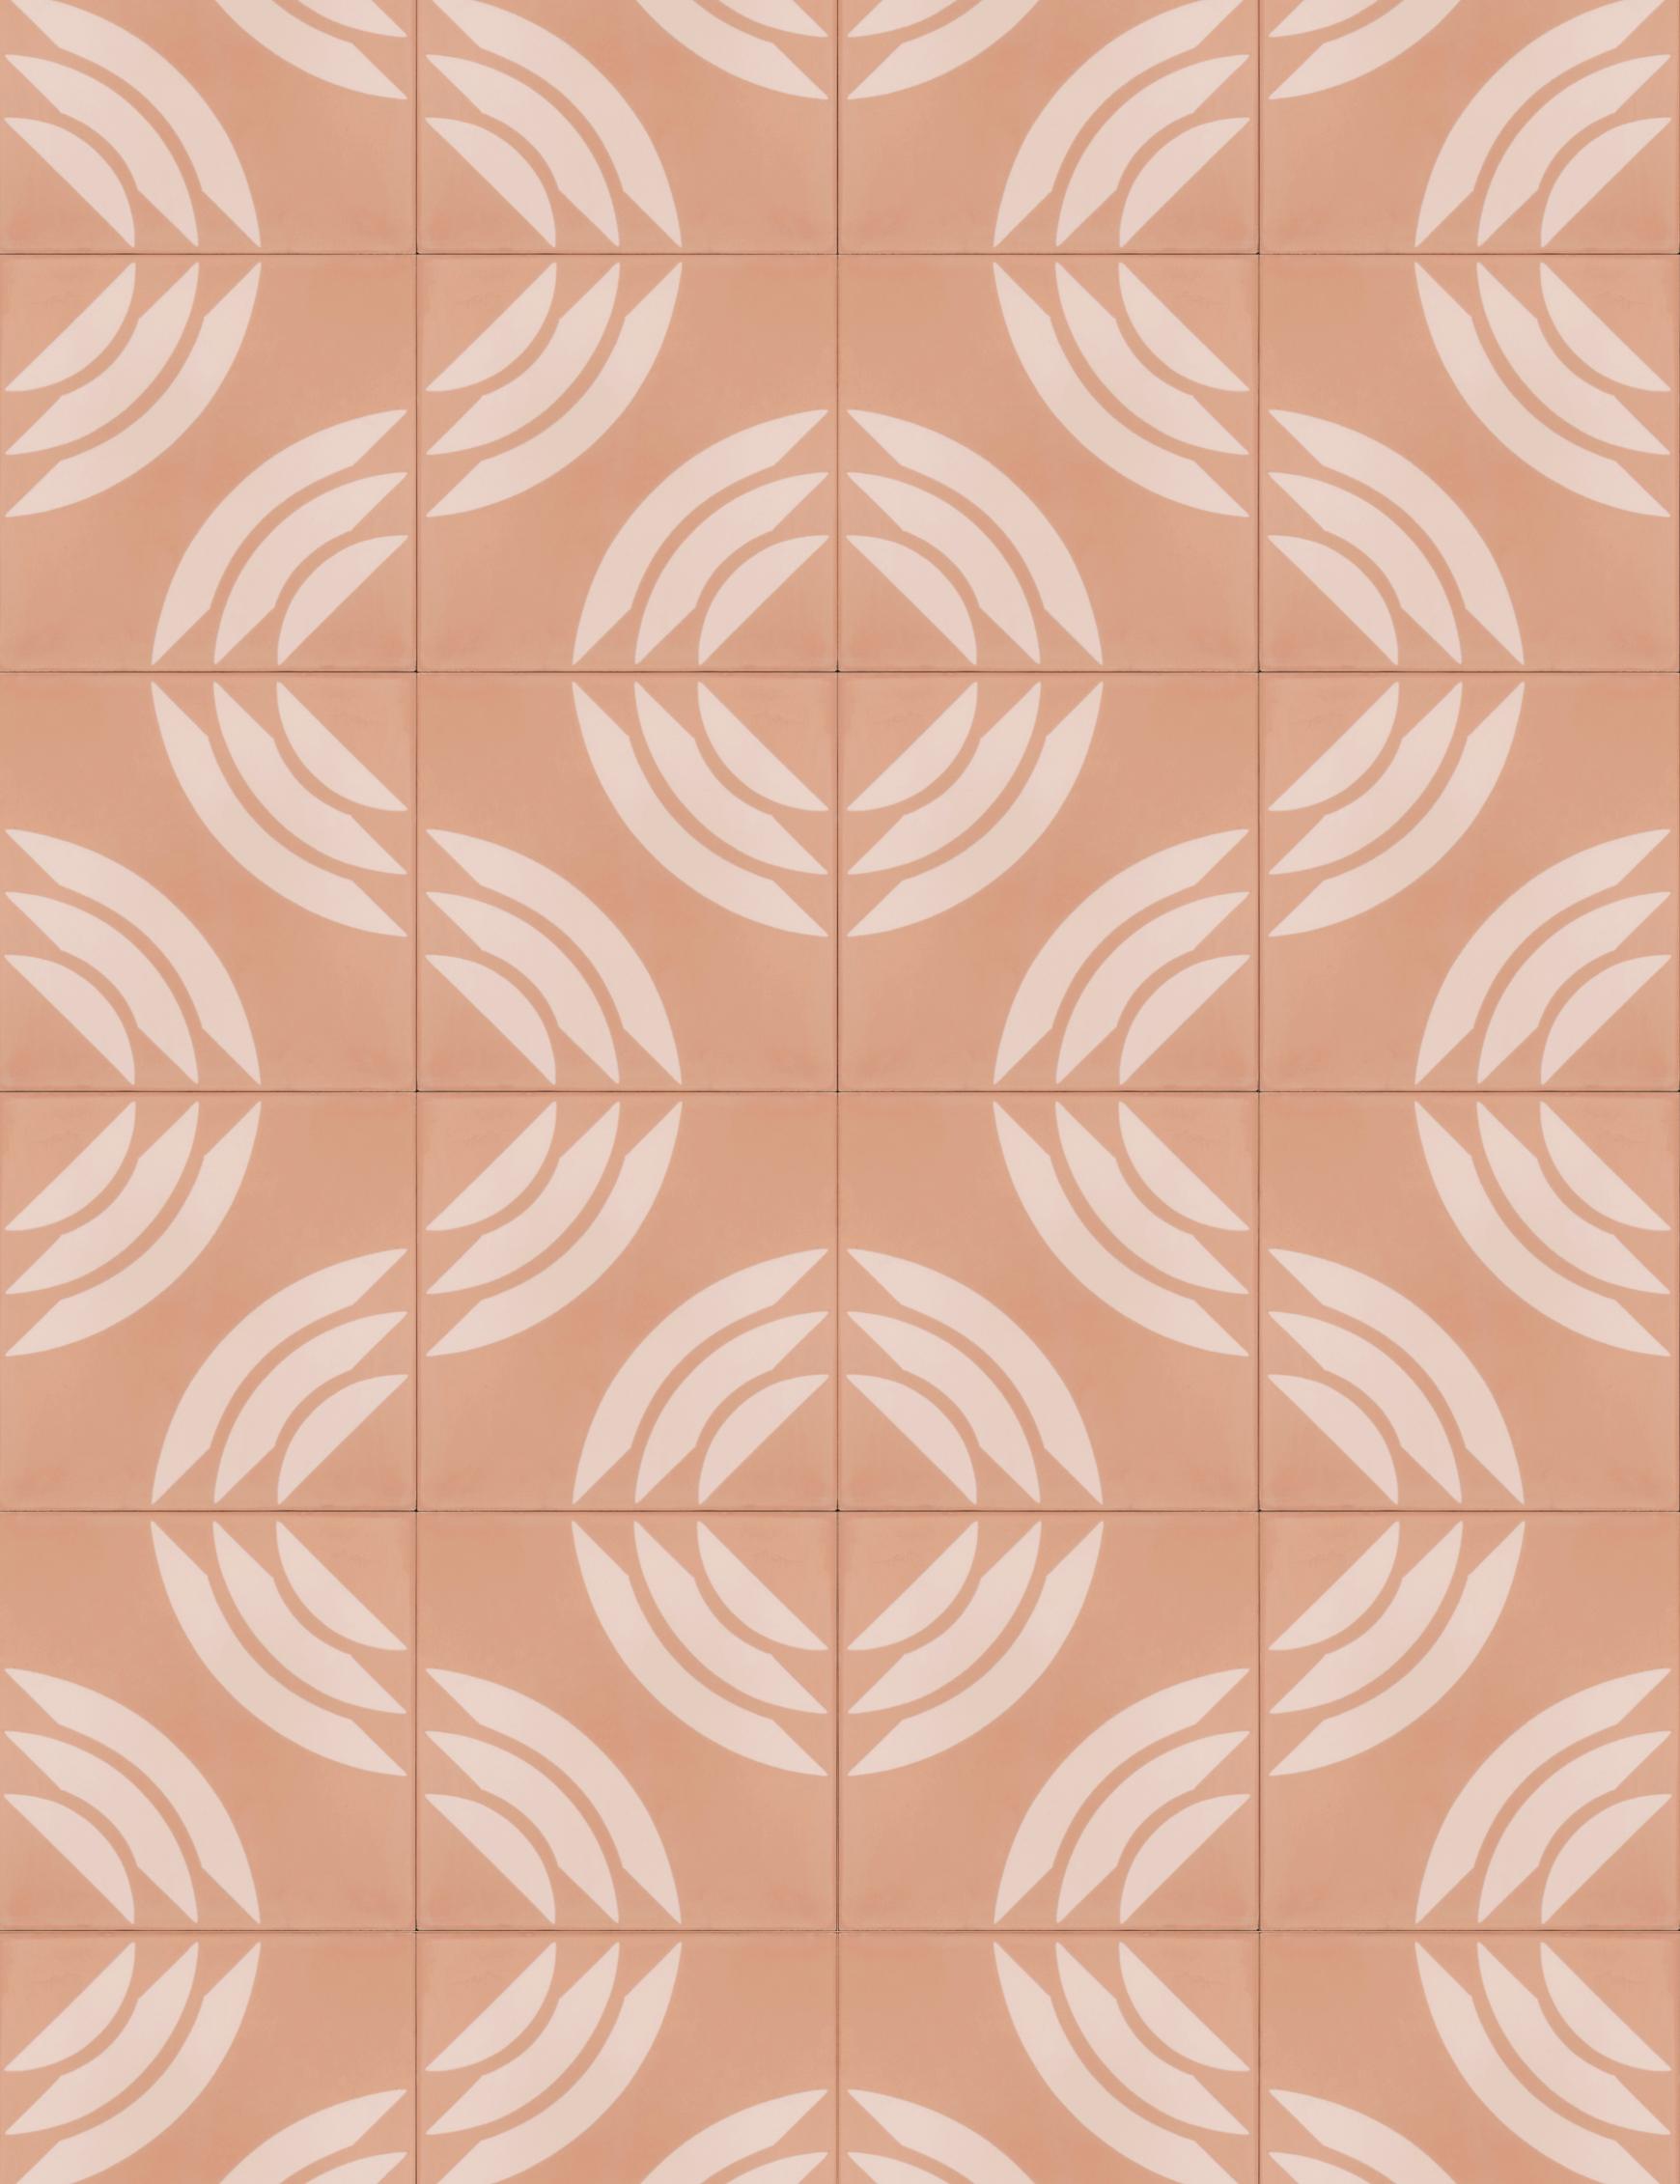 A snakelike shape that twists and turns to form an infinite range of winding patterns for your surface.

Price listed is for an in stock tile sample. For an order quote including freight, please message with the quantity needed before overage and